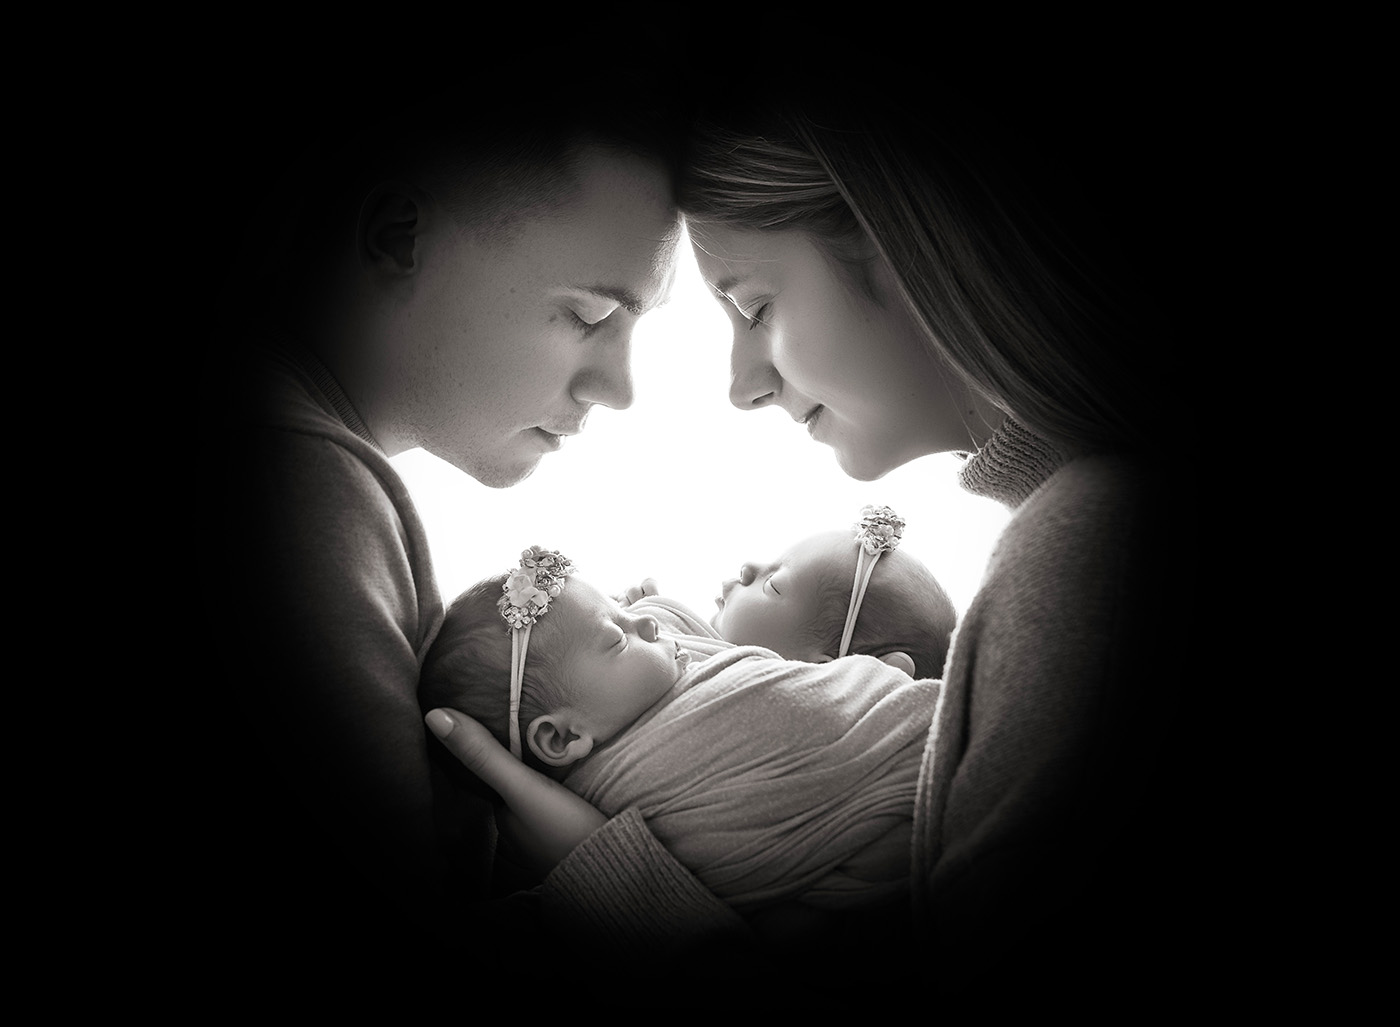 newborn twin photography mom and dad with heads together praying over their newborn twin girls in black and white photograph